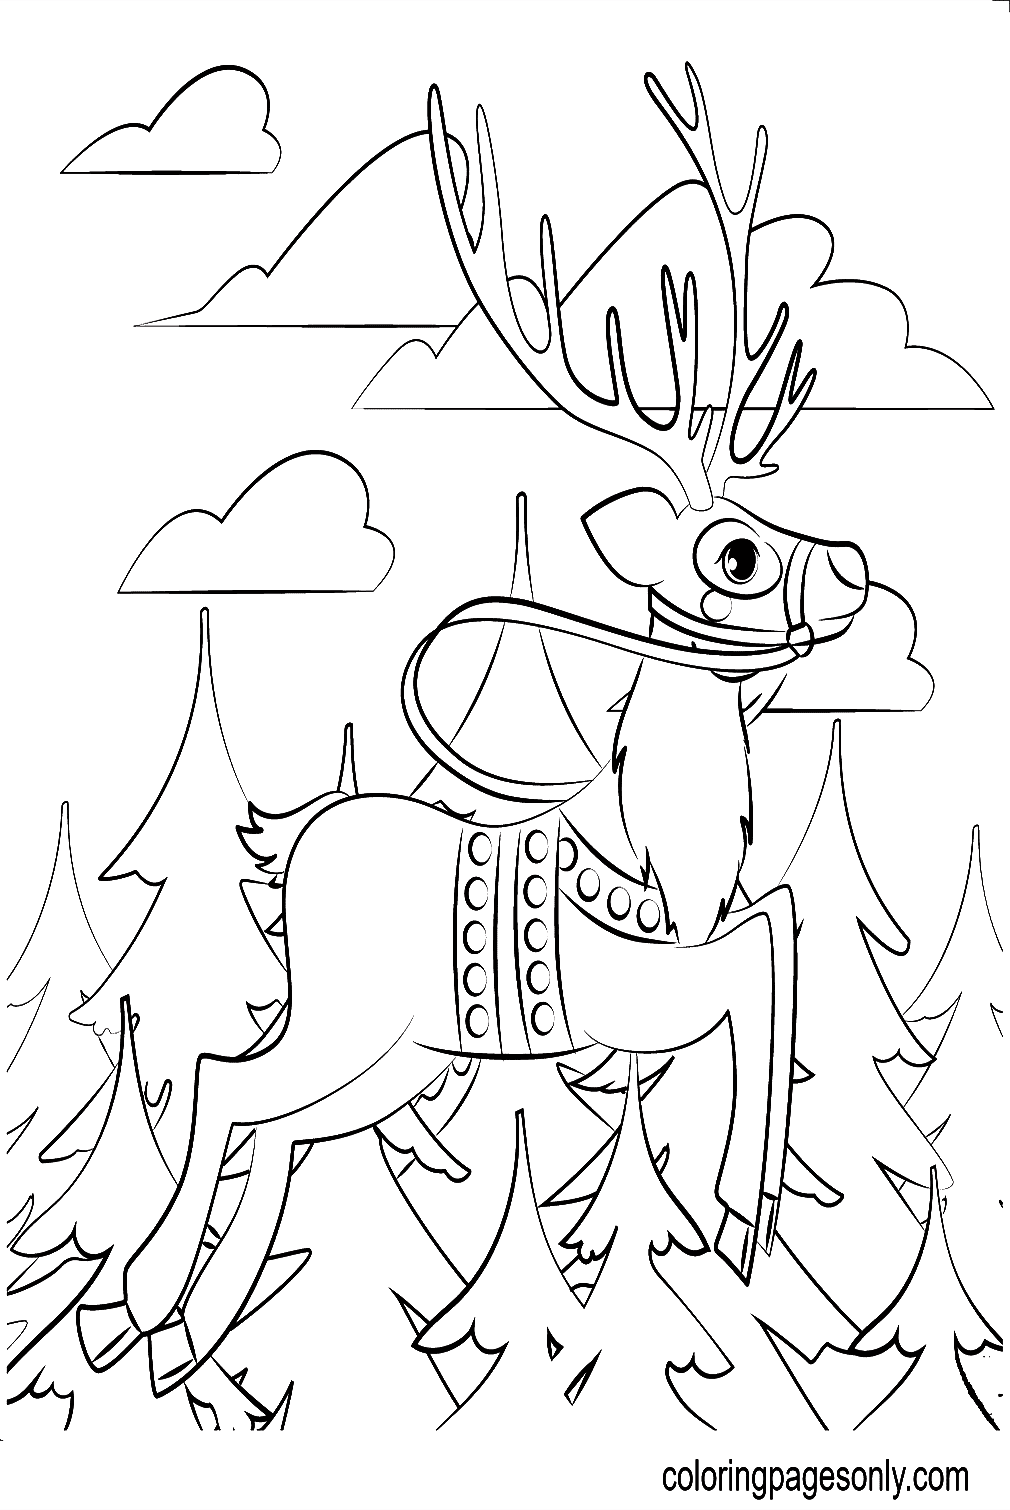 Reindeer Walking Through The Pine Forest Coloring Page